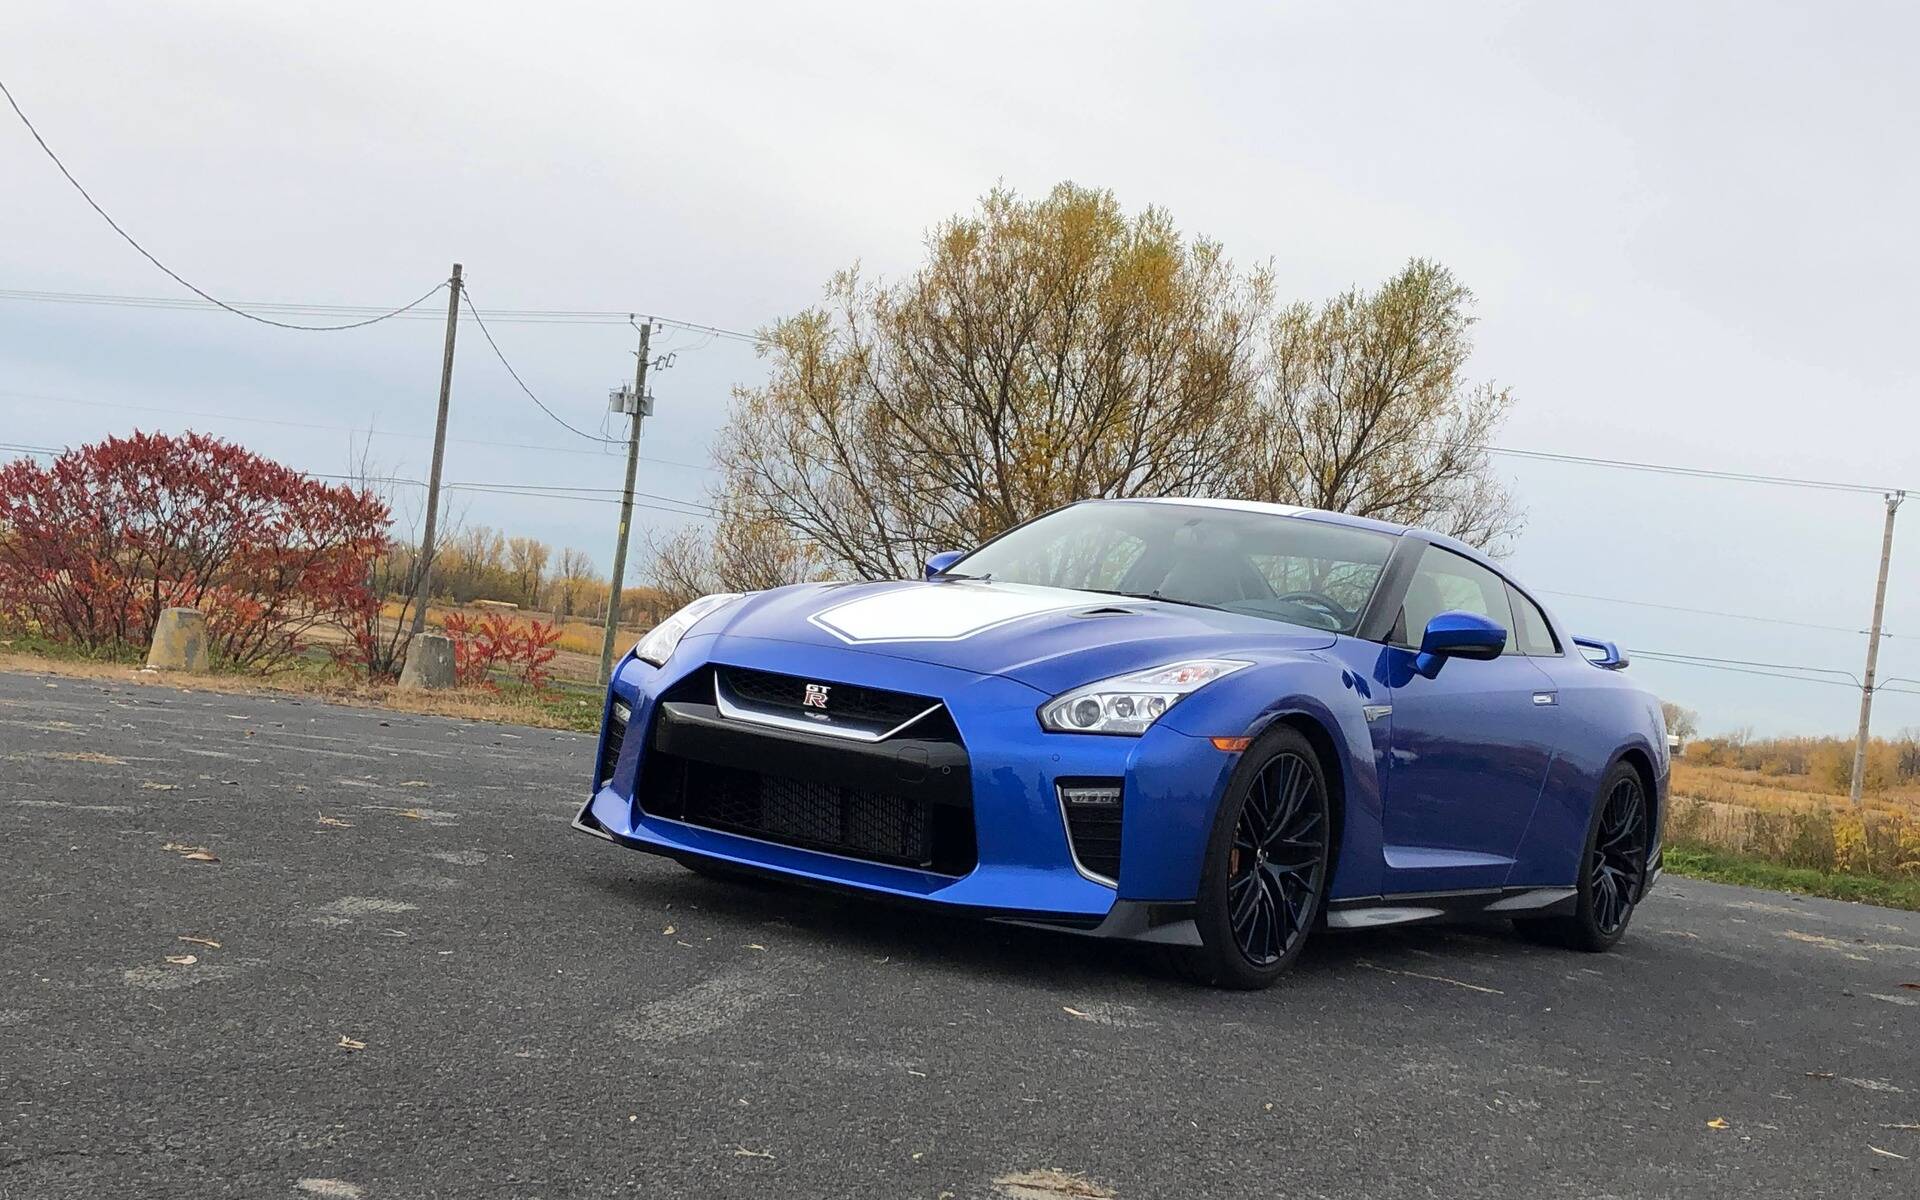 21 Nissan Gt R News Reviews Picture Galleries And Videos The Car Guide